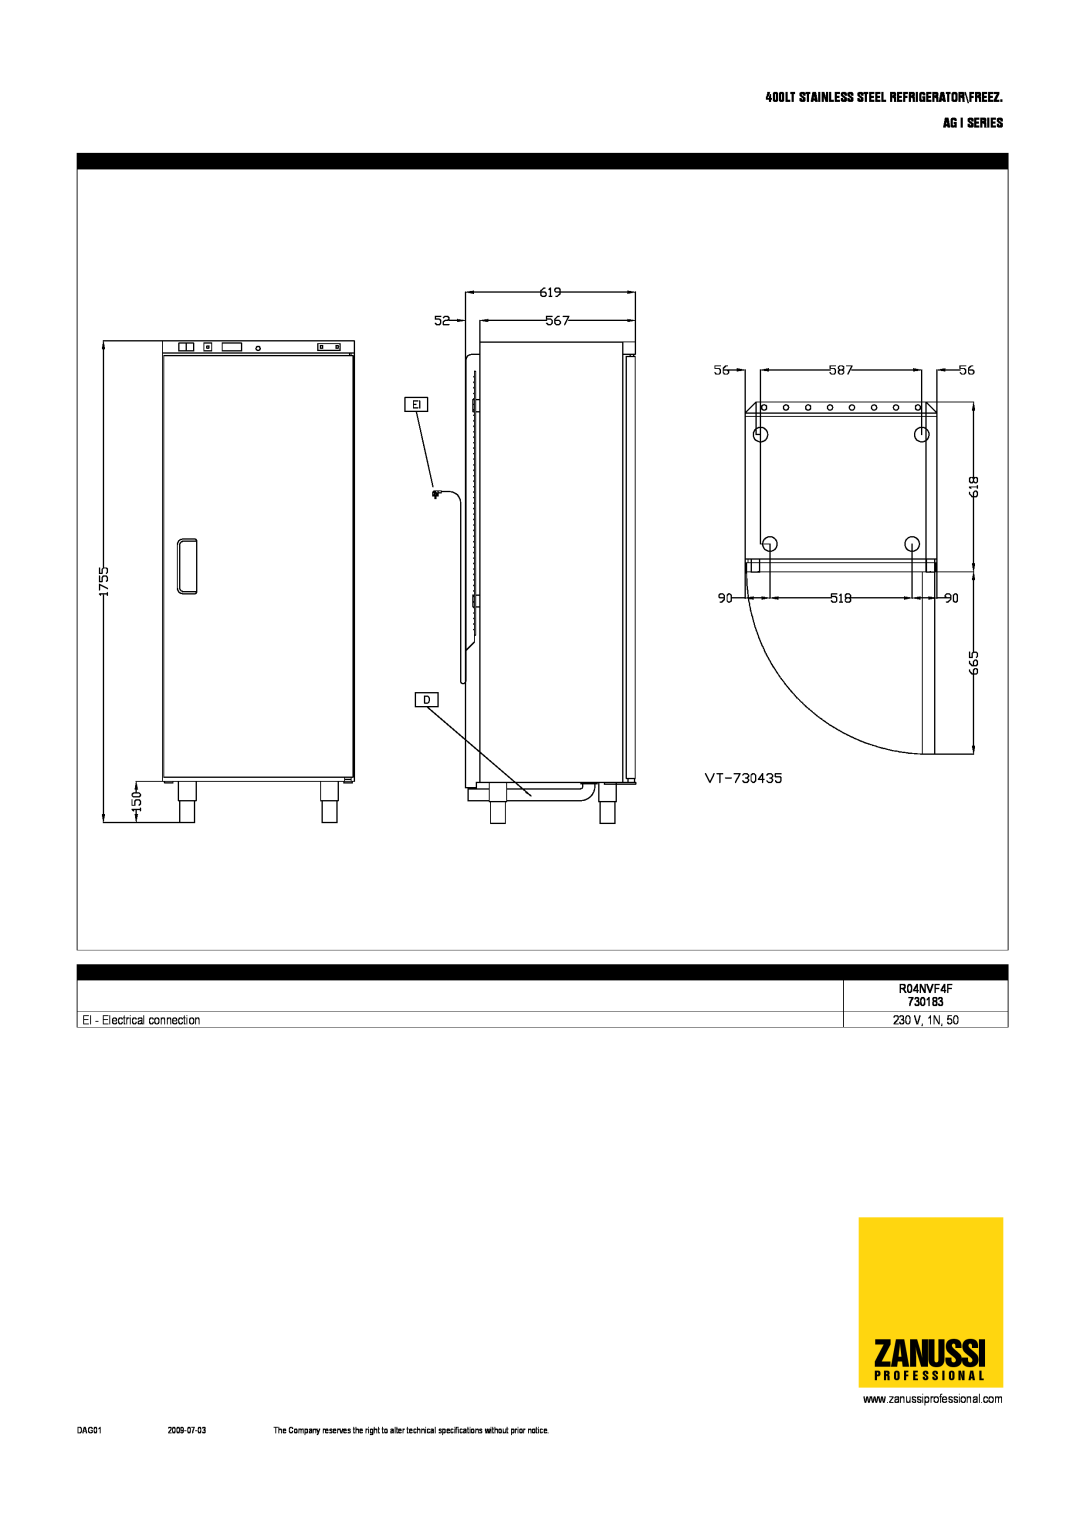 Zanussi 730190, 730189 Zanussi, 730183, EI - Electrical connection, 400LT STAINLESS STEEL REFRIGERATOR\FREEZ, Ag I Series 